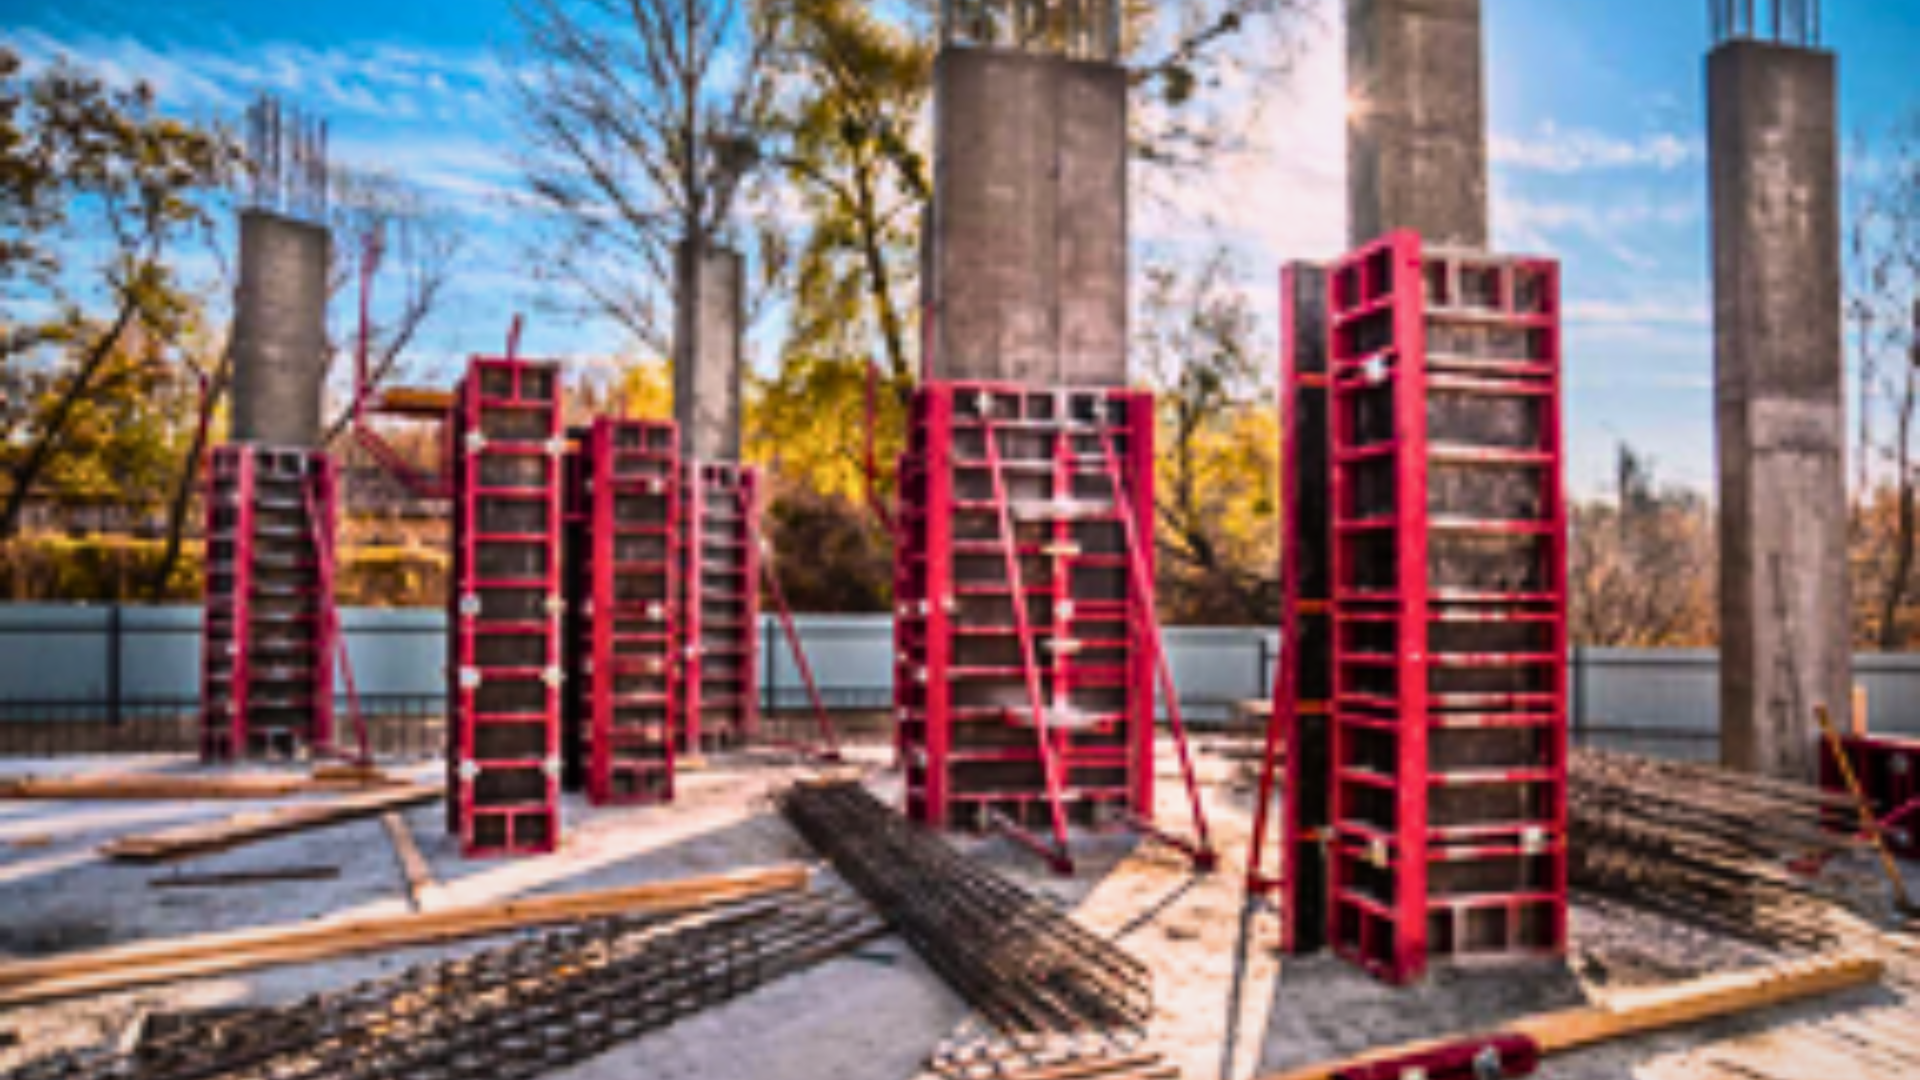 Method and Period of Formwork Removal